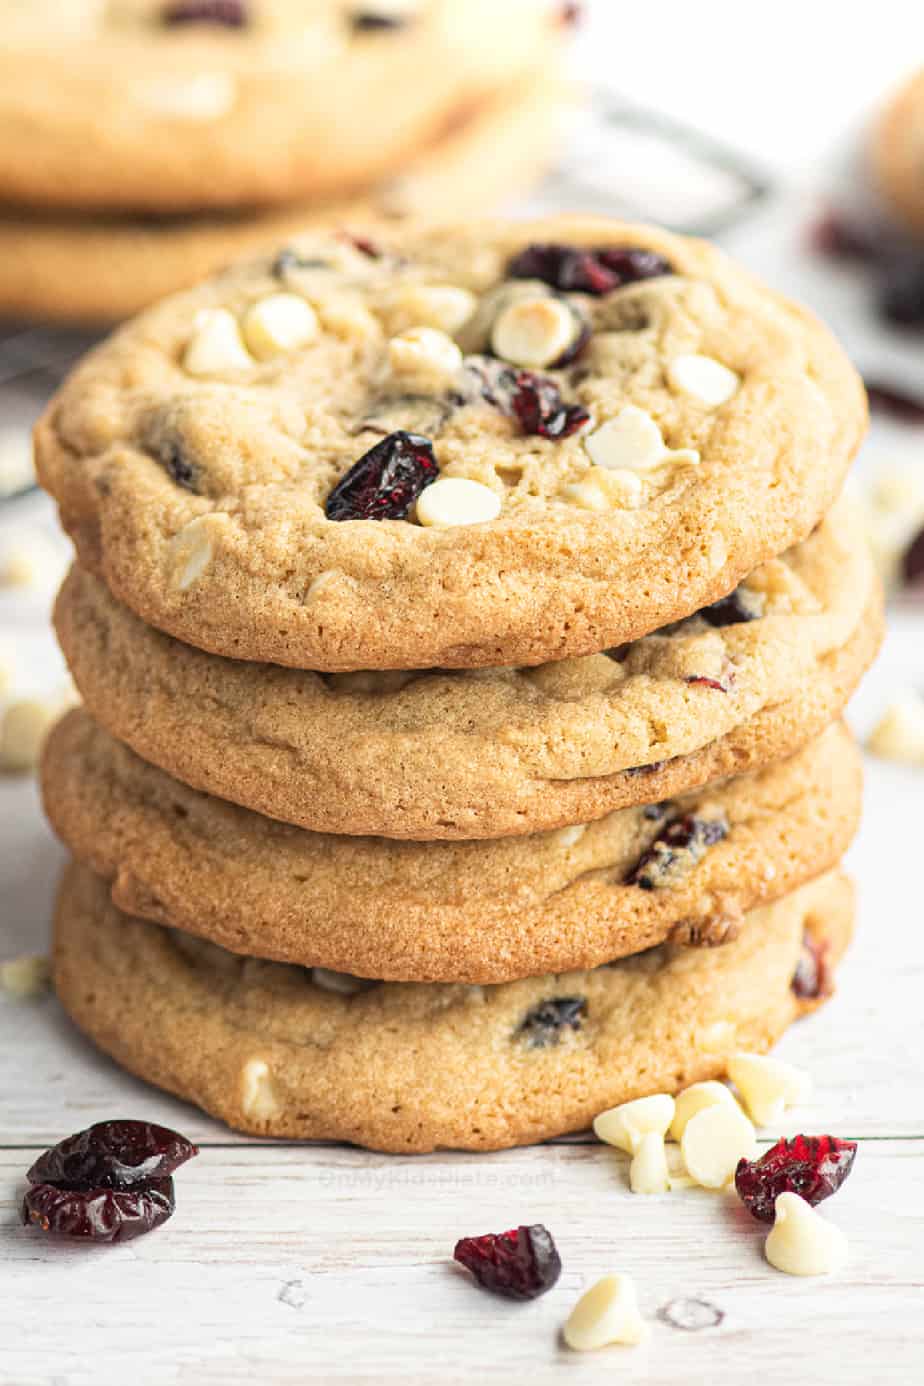 Super close up of four stacked white chocolate chip cranberry cookies from the side